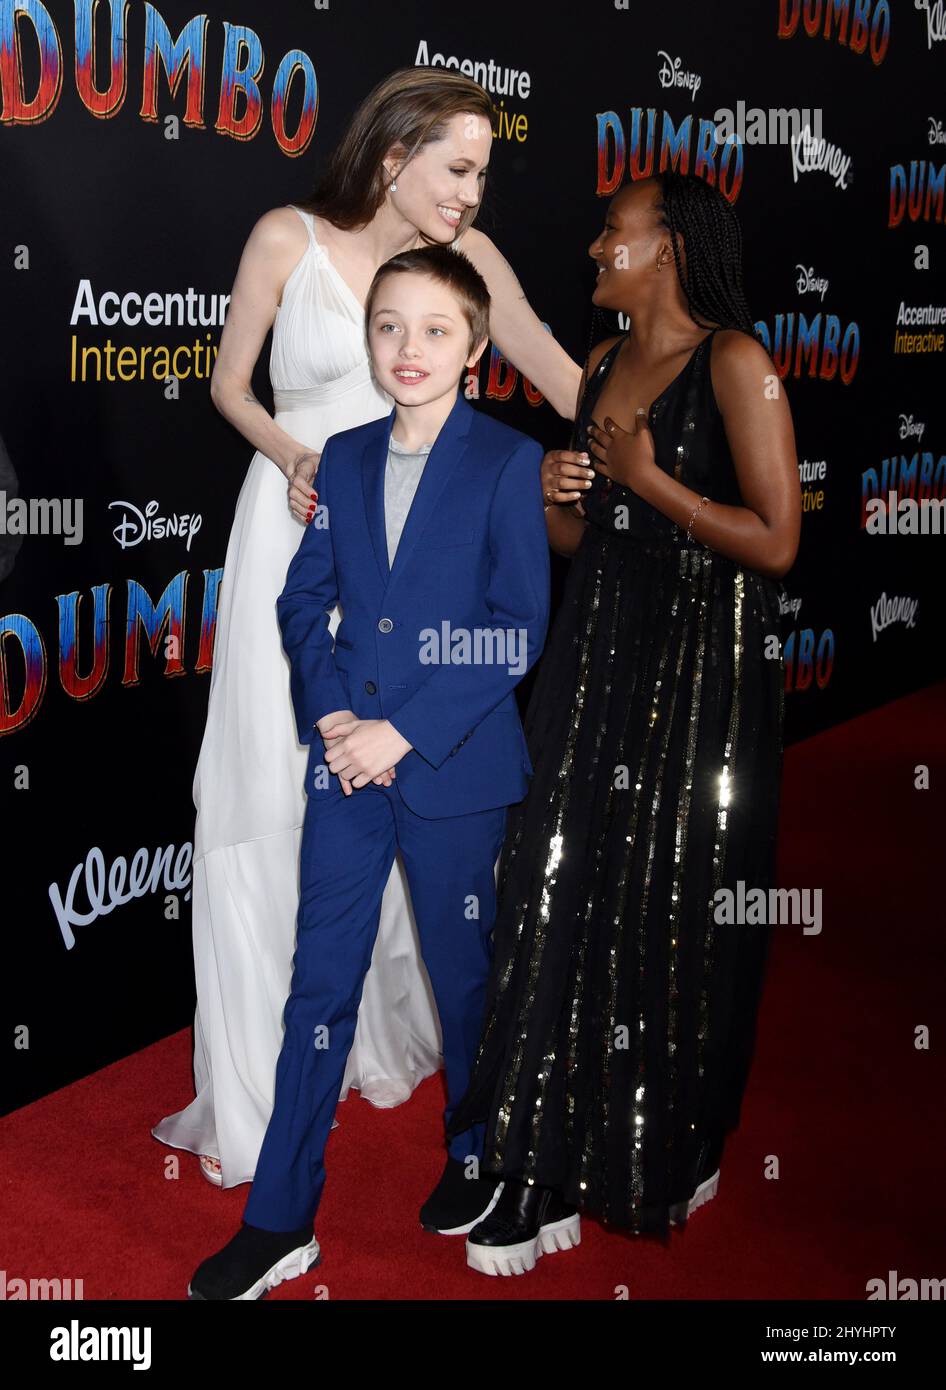 Angelina Jolie, Zahara Jolie-Pitt and Knox Jolie-Pitt arriving for Disney's premiere of 'Dumbo' held at the El Capitan Theatre on March 11, 2019 in Hollywood, Los Angeles. Stock Photo